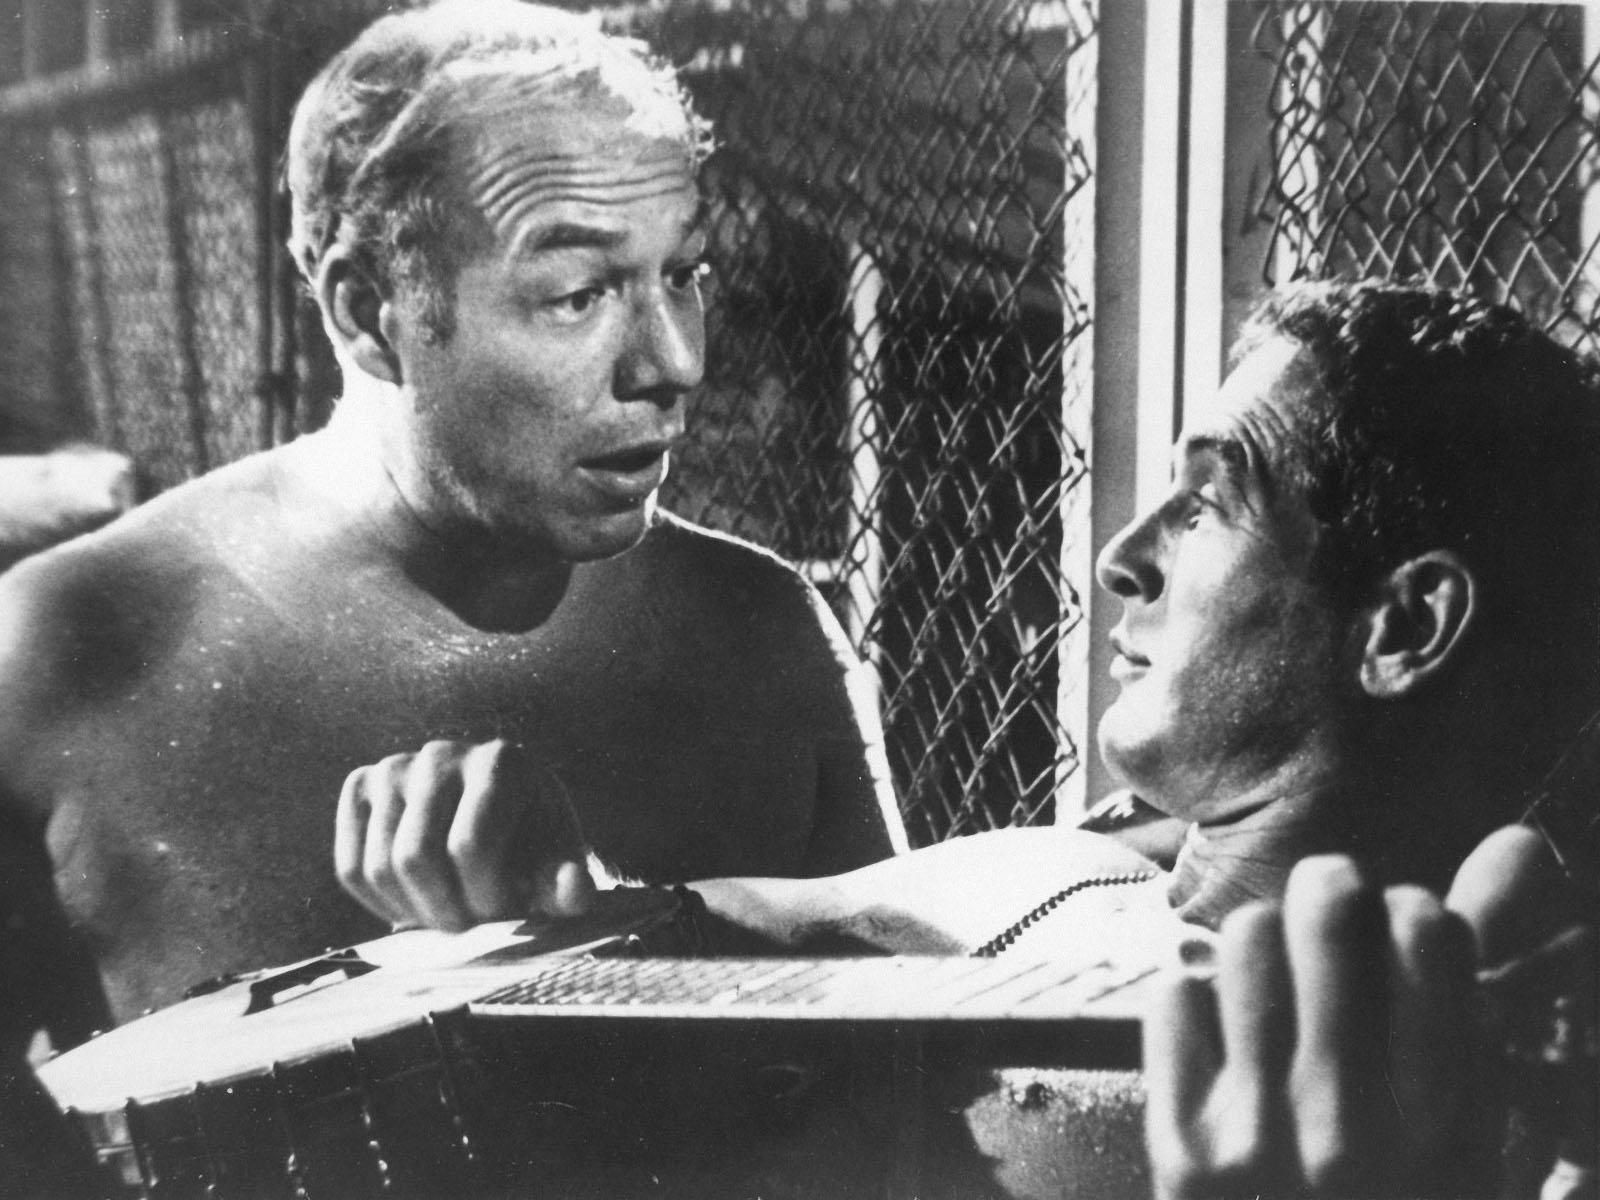 George Kennedy & Paul Newman Cool Hand Luke I don't care if rains or freezes, long as I have my plastic Jesus sitting on. Cool hand luke, George kennedy, Luke